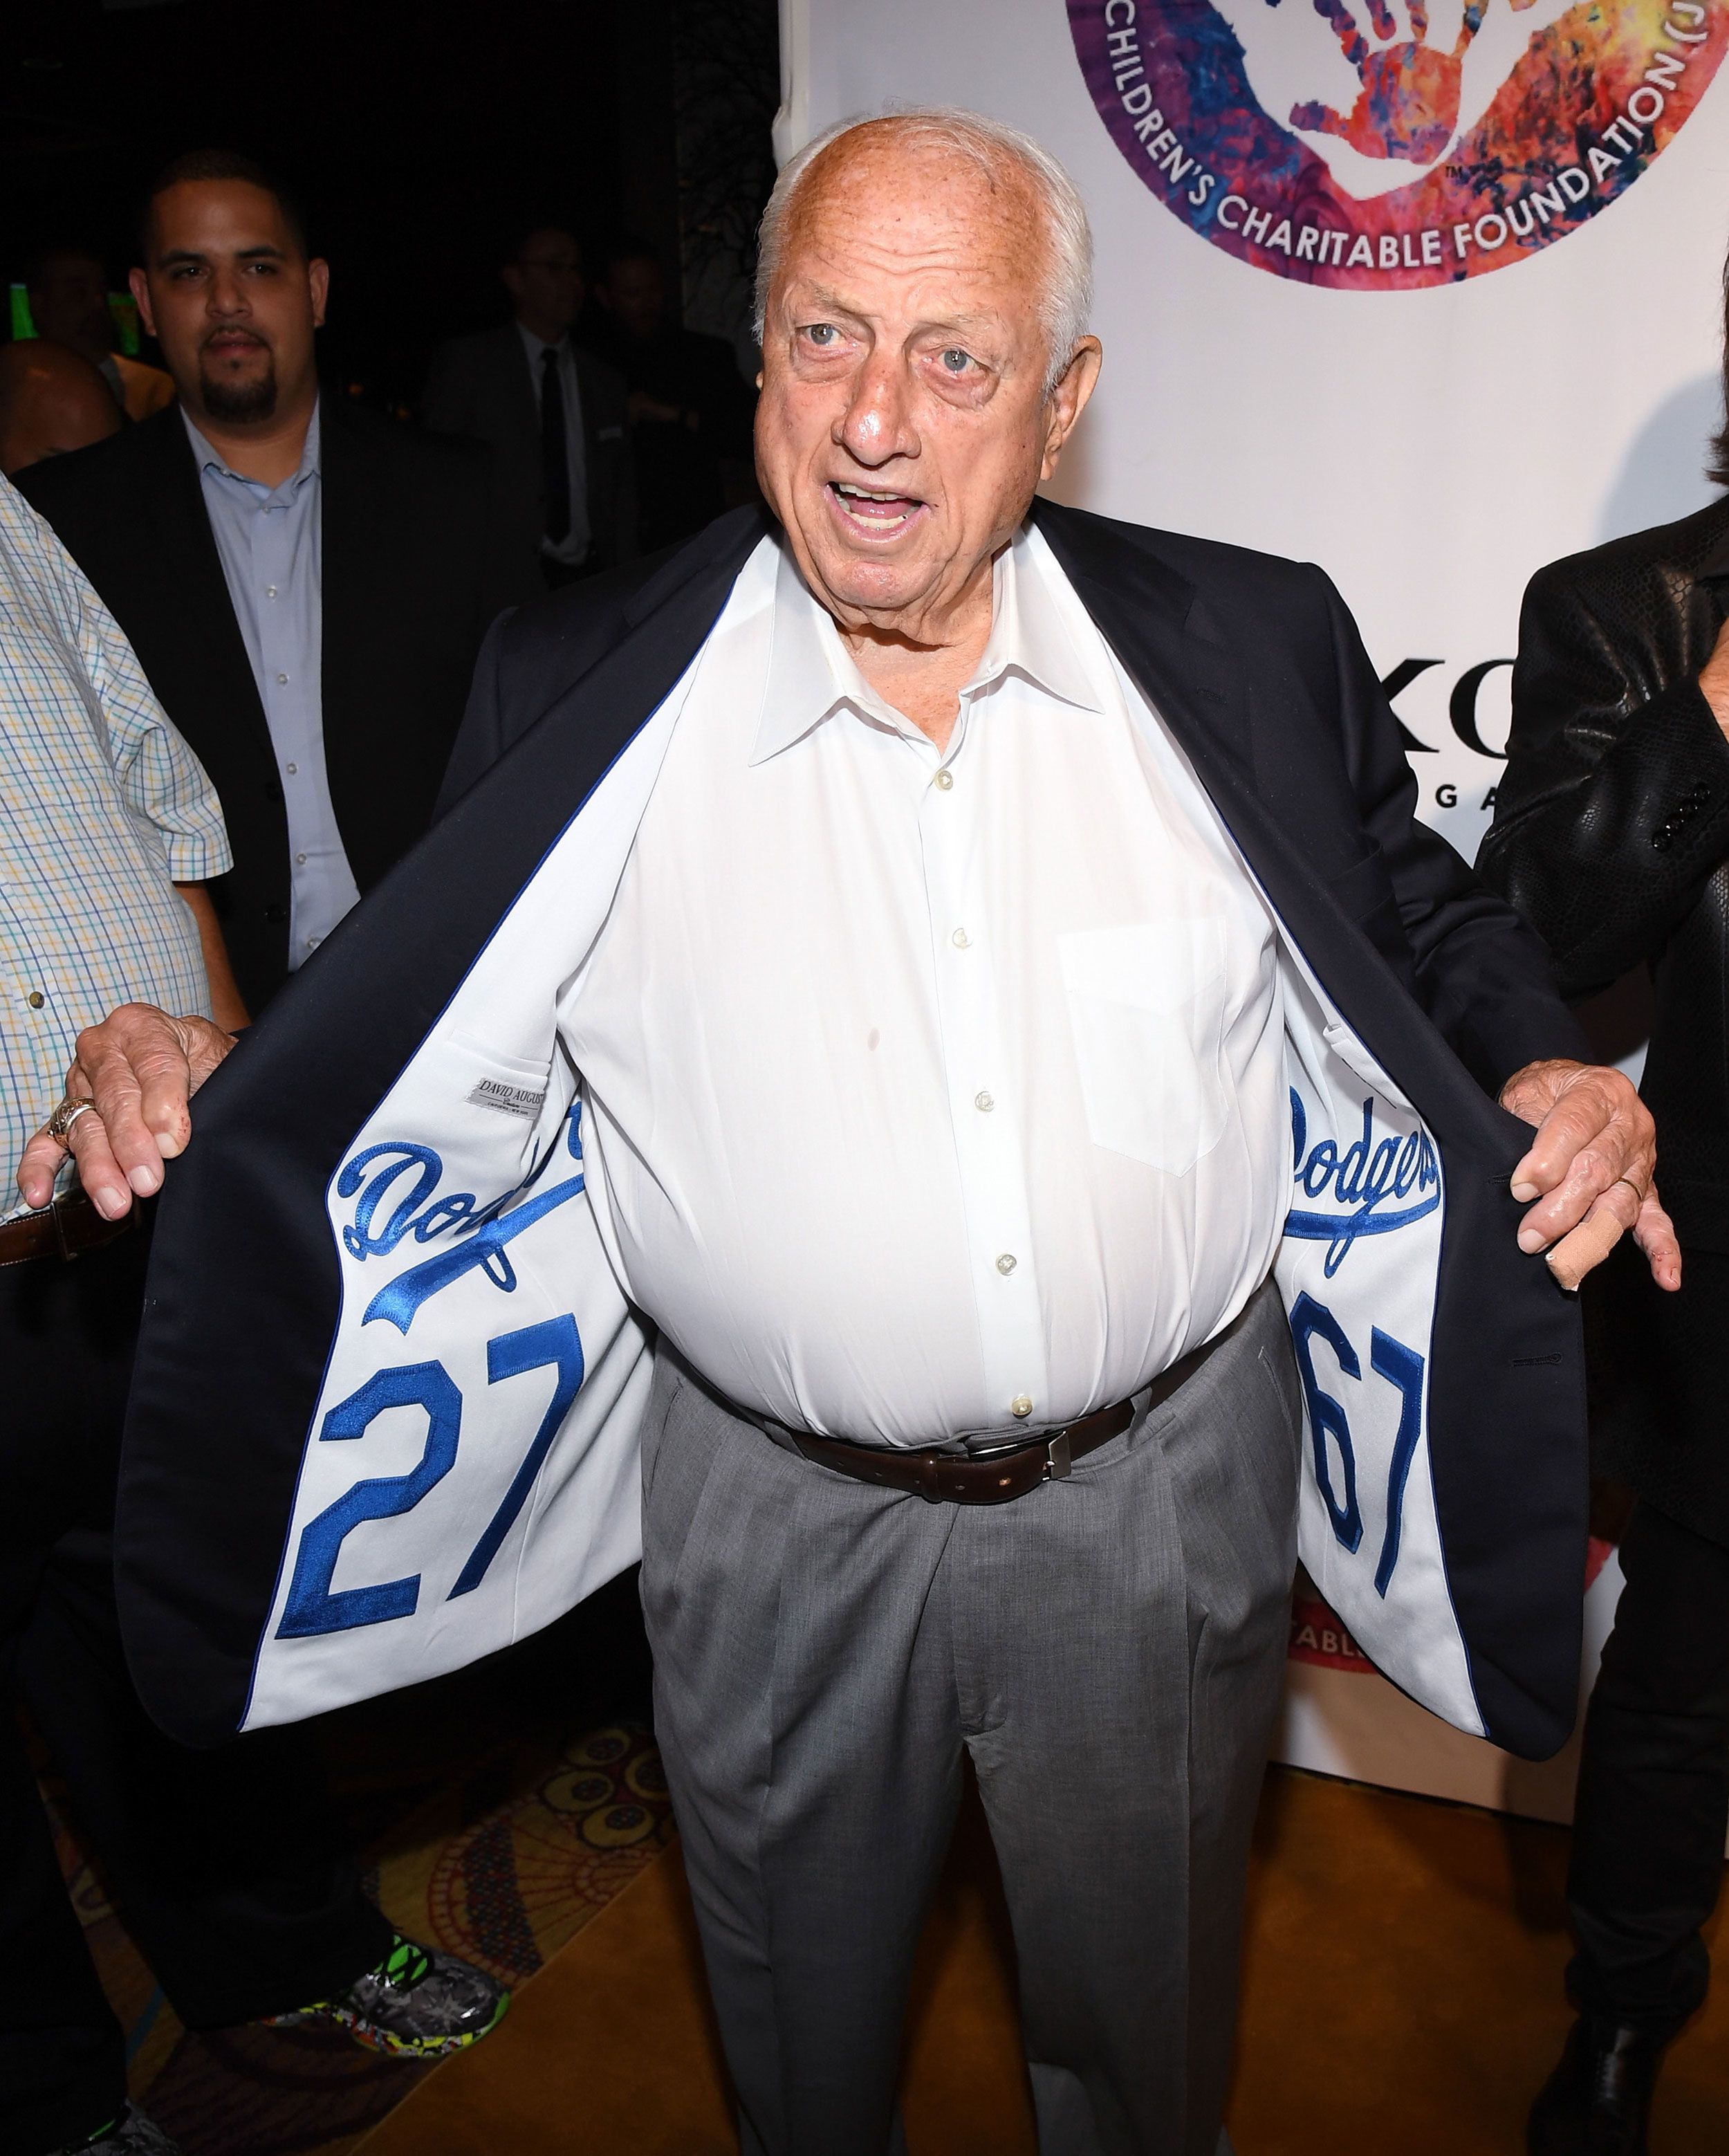 Tommy Lasorda's Death Starts a Conversation About His Son - The